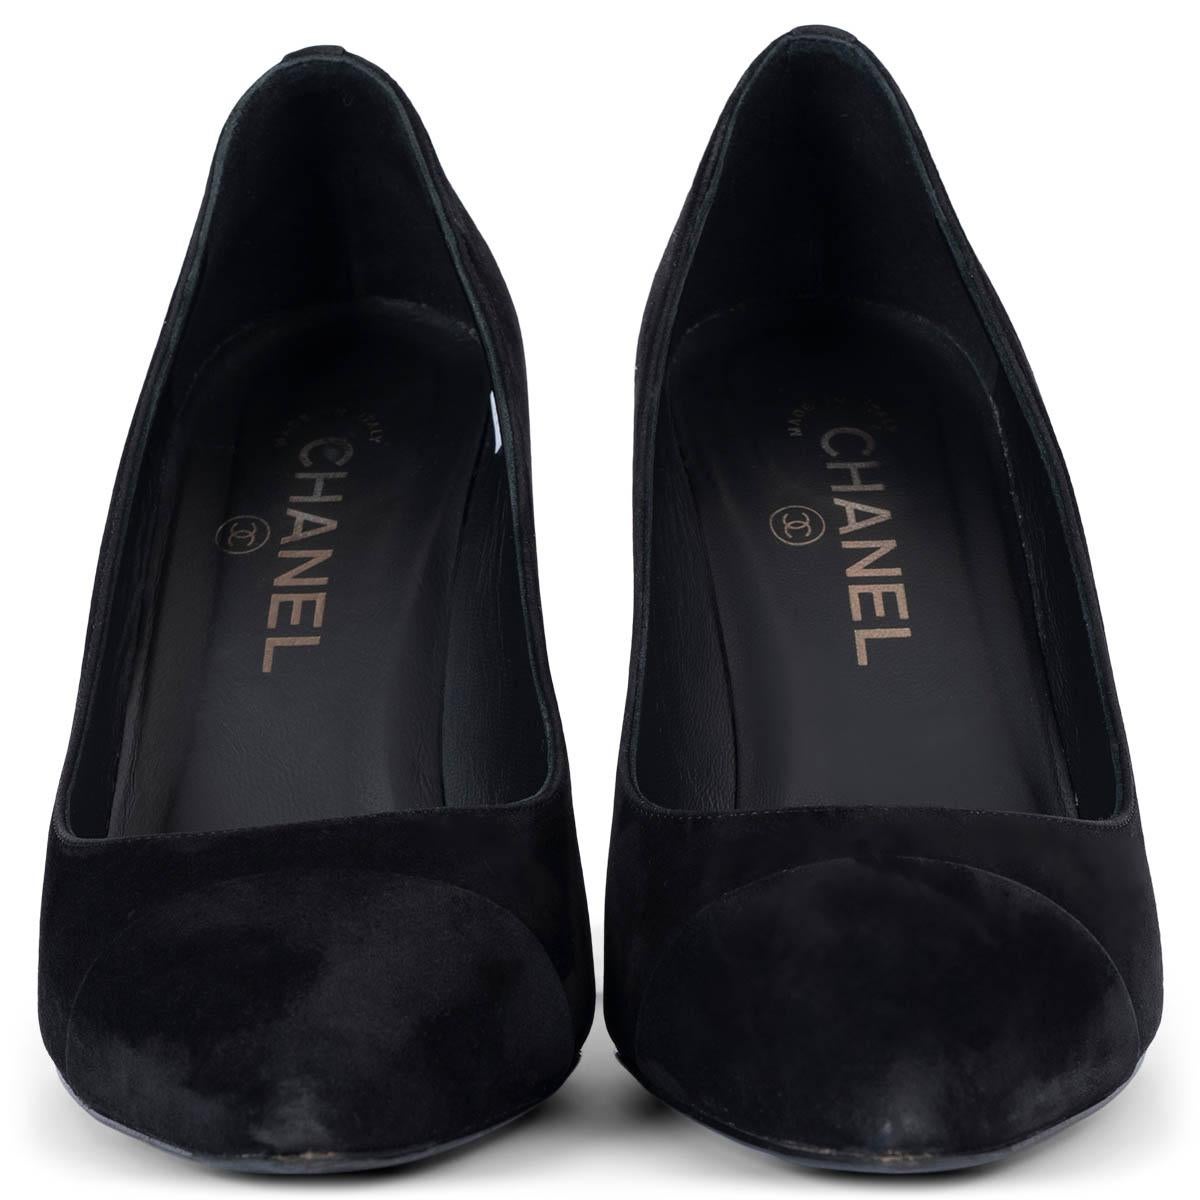 100% authentic Chanel pointed-toe pumps in black suede leather embellished with silver-tone CC logo on the heel. Have been worn and show some wear on the heel and the tip. Overall in very good condition. 

Measurements
Imprinted Size	38.5
Shoe